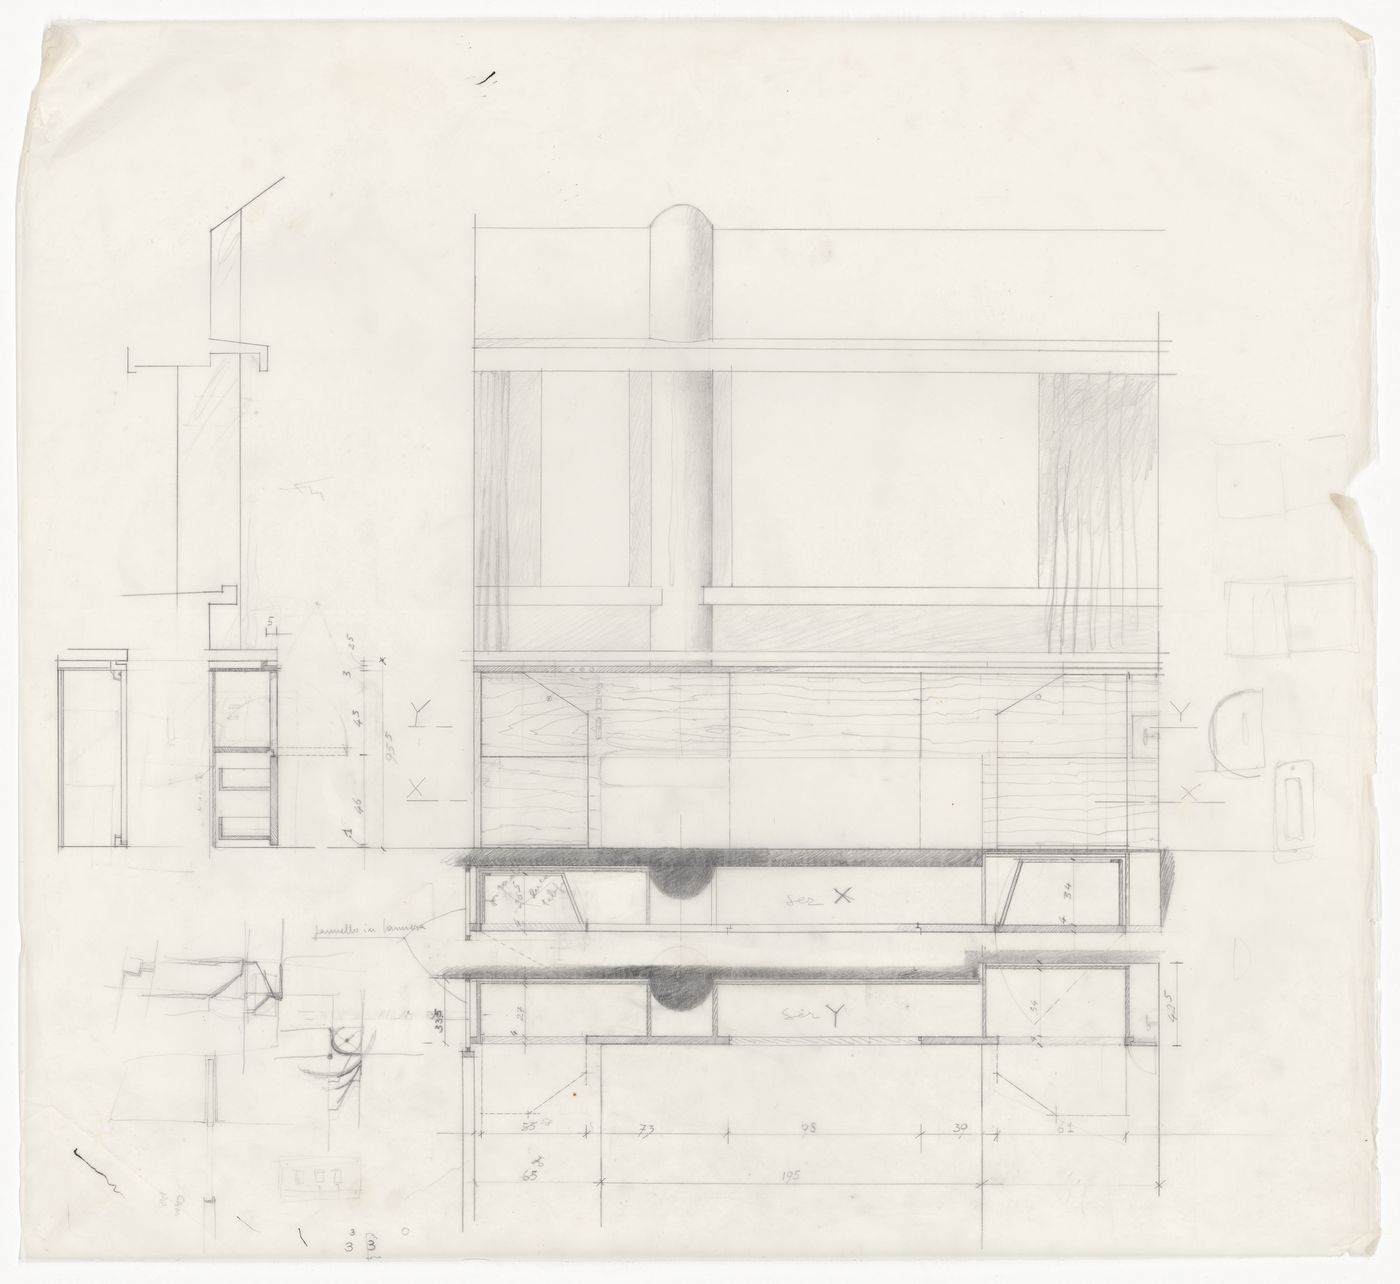 Sections and elevations for Appartamento Grossetti, Milan, Italy